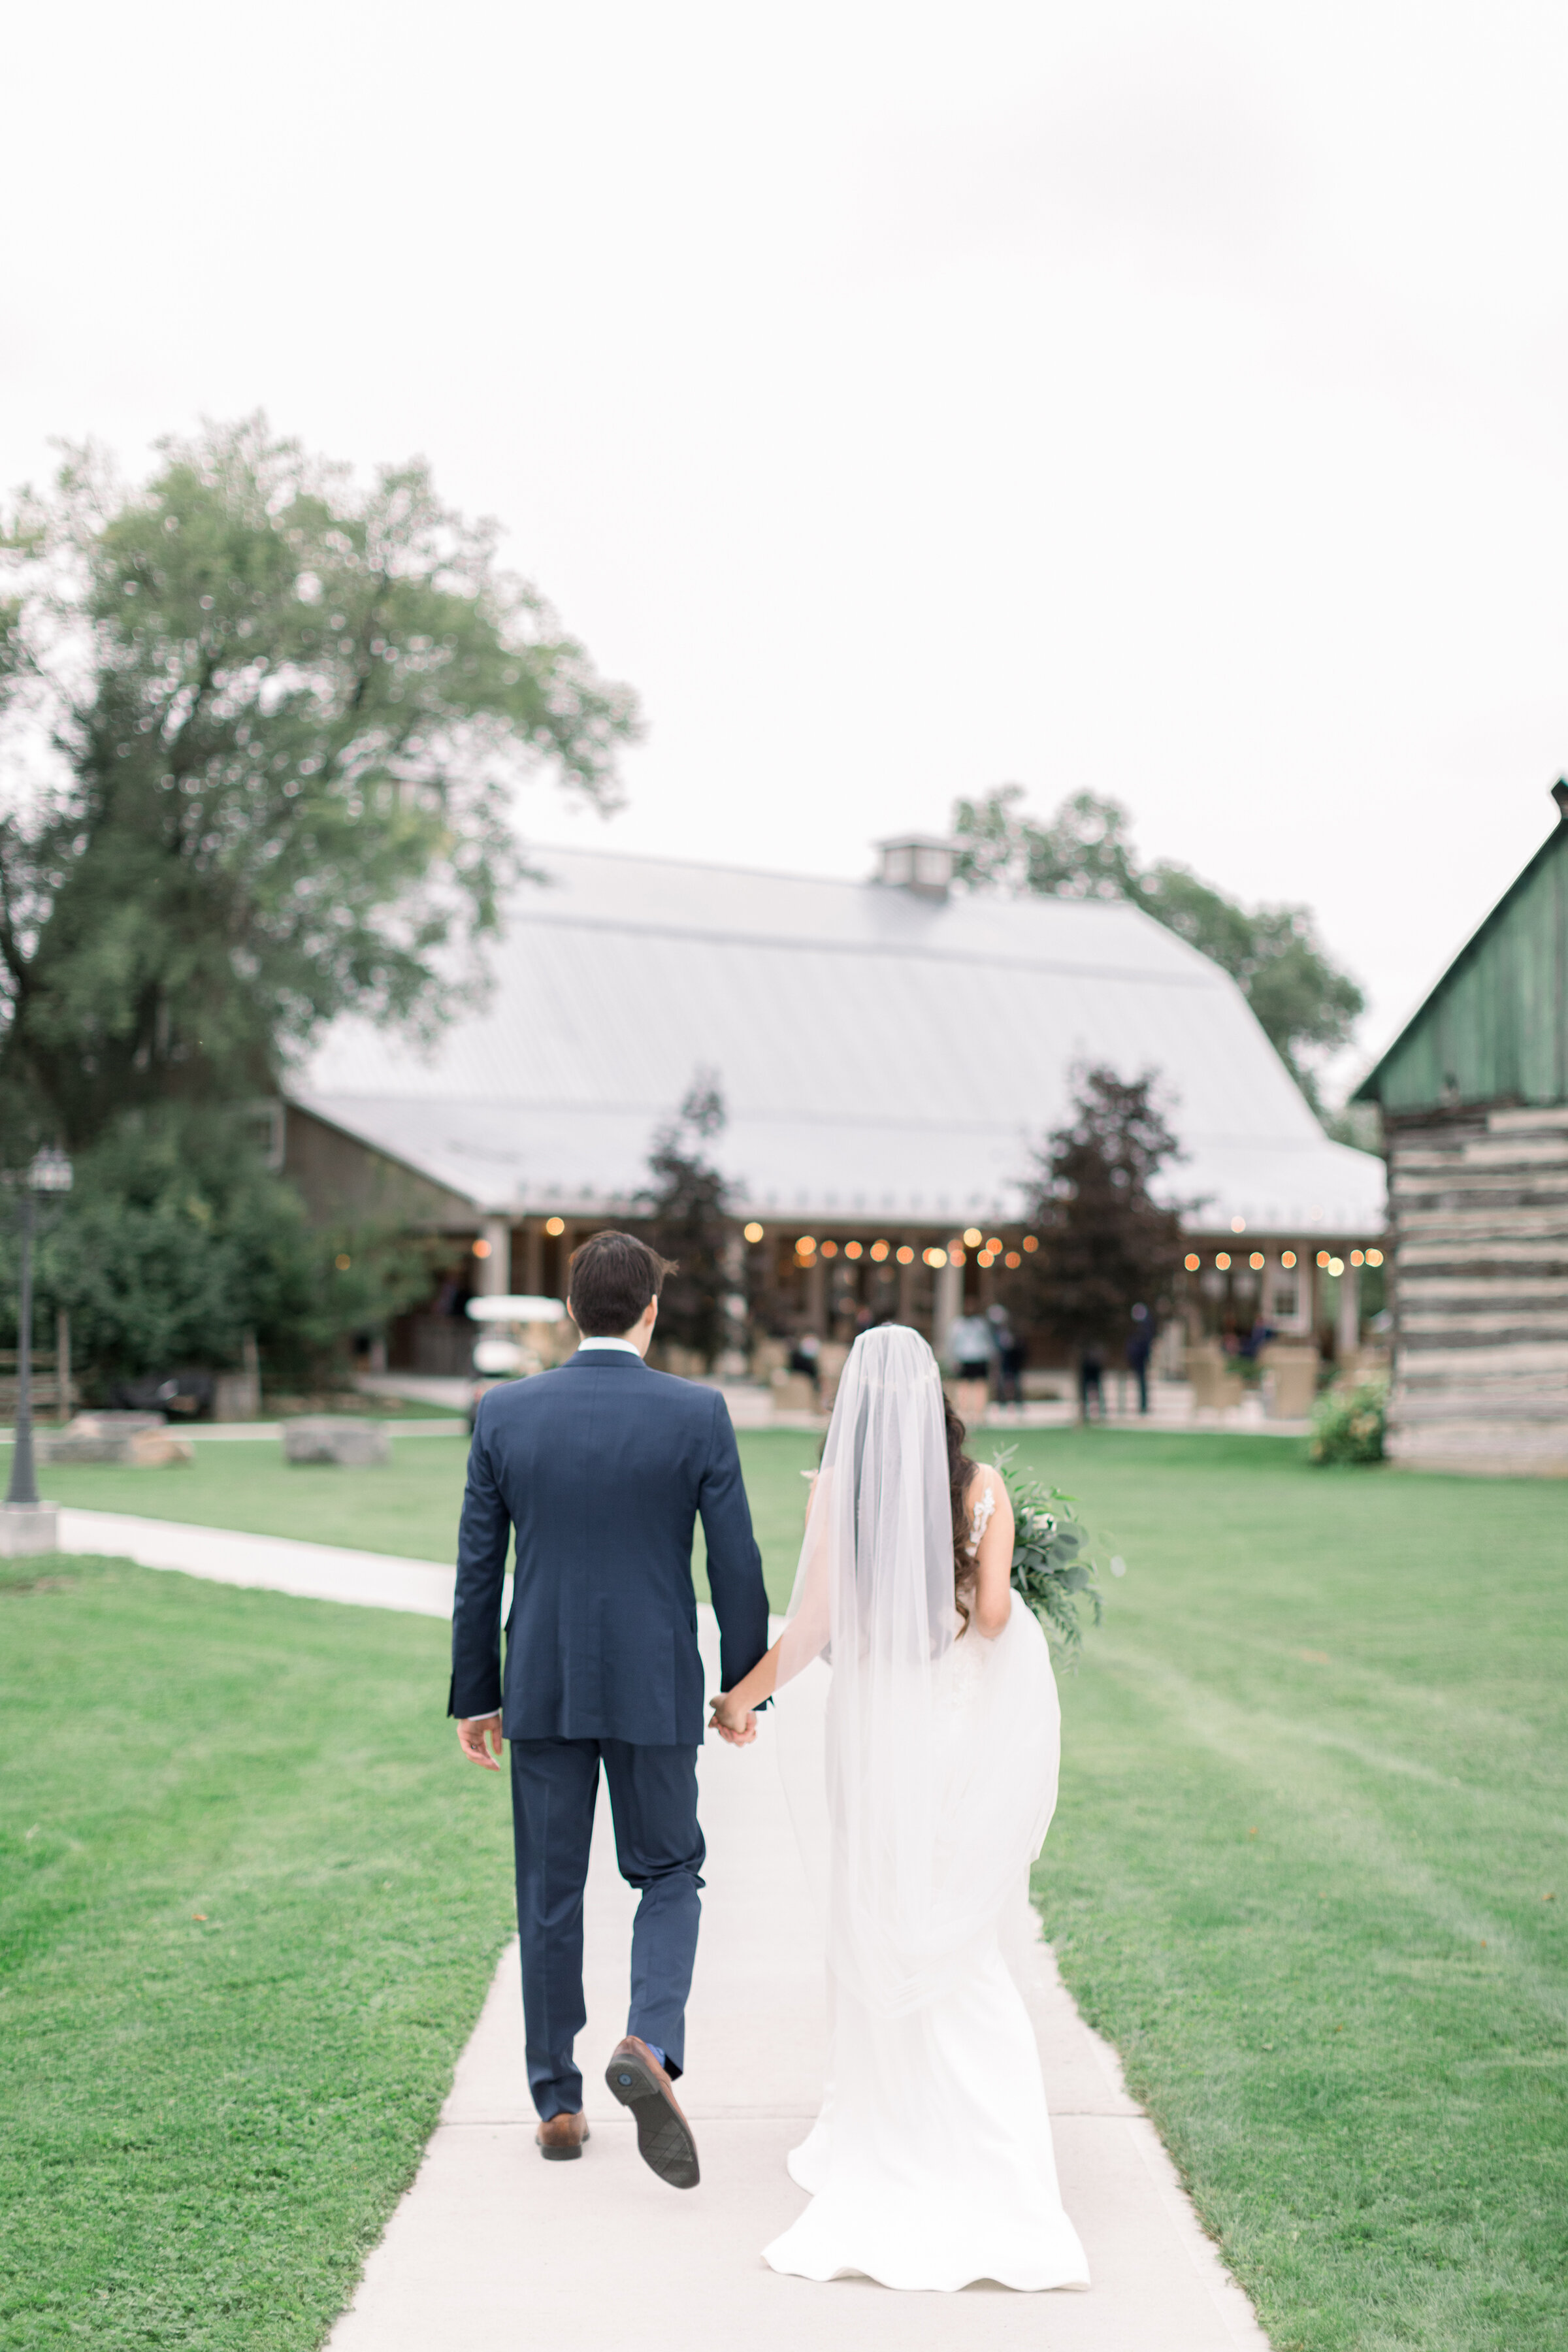  A newly wed couple walk hand in hand to the wedding reception on the stunning Stonefields Estates, Carleton Place Ottawa by Chelsea Mason Photography. Rustic and chic wedding aesthetic wedding day photo shoot inspiration ideas and goals wedding loca